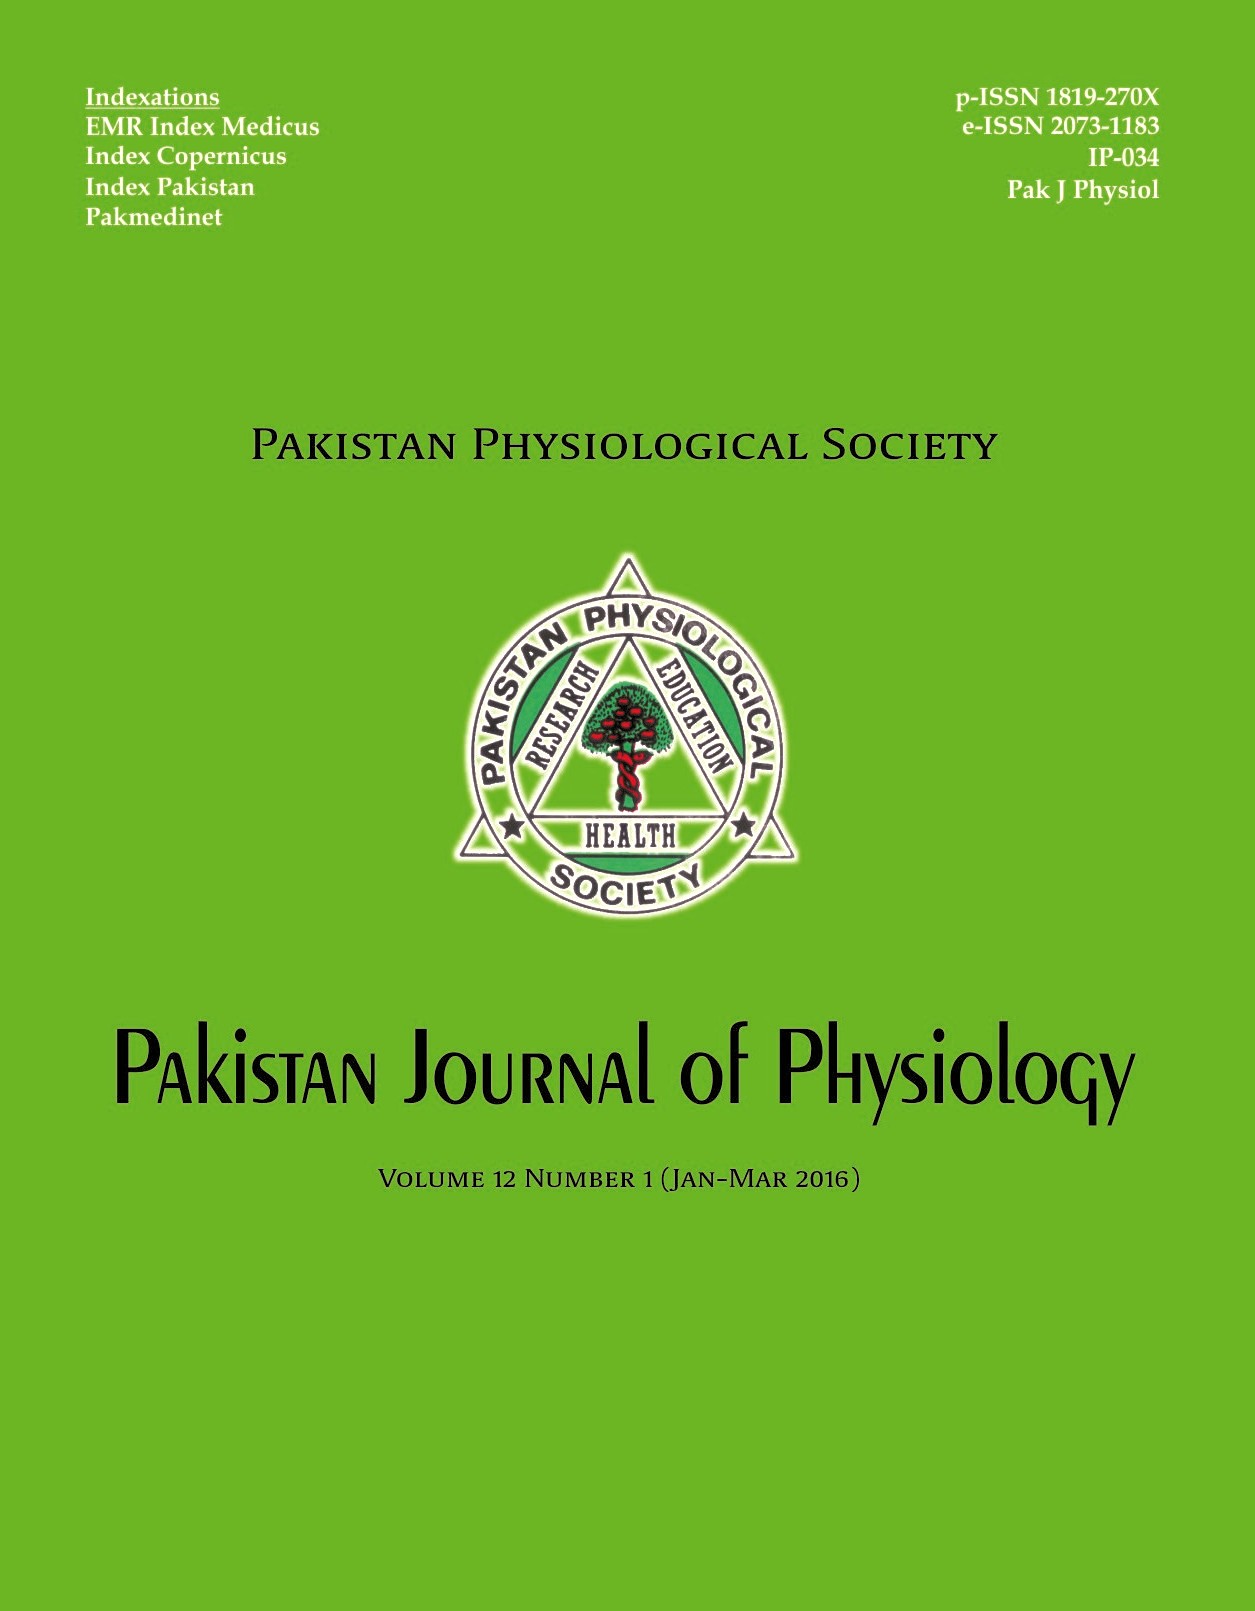 					View Vol. 12 No. 1 (2016): Pakistan Journal of Physiology
				